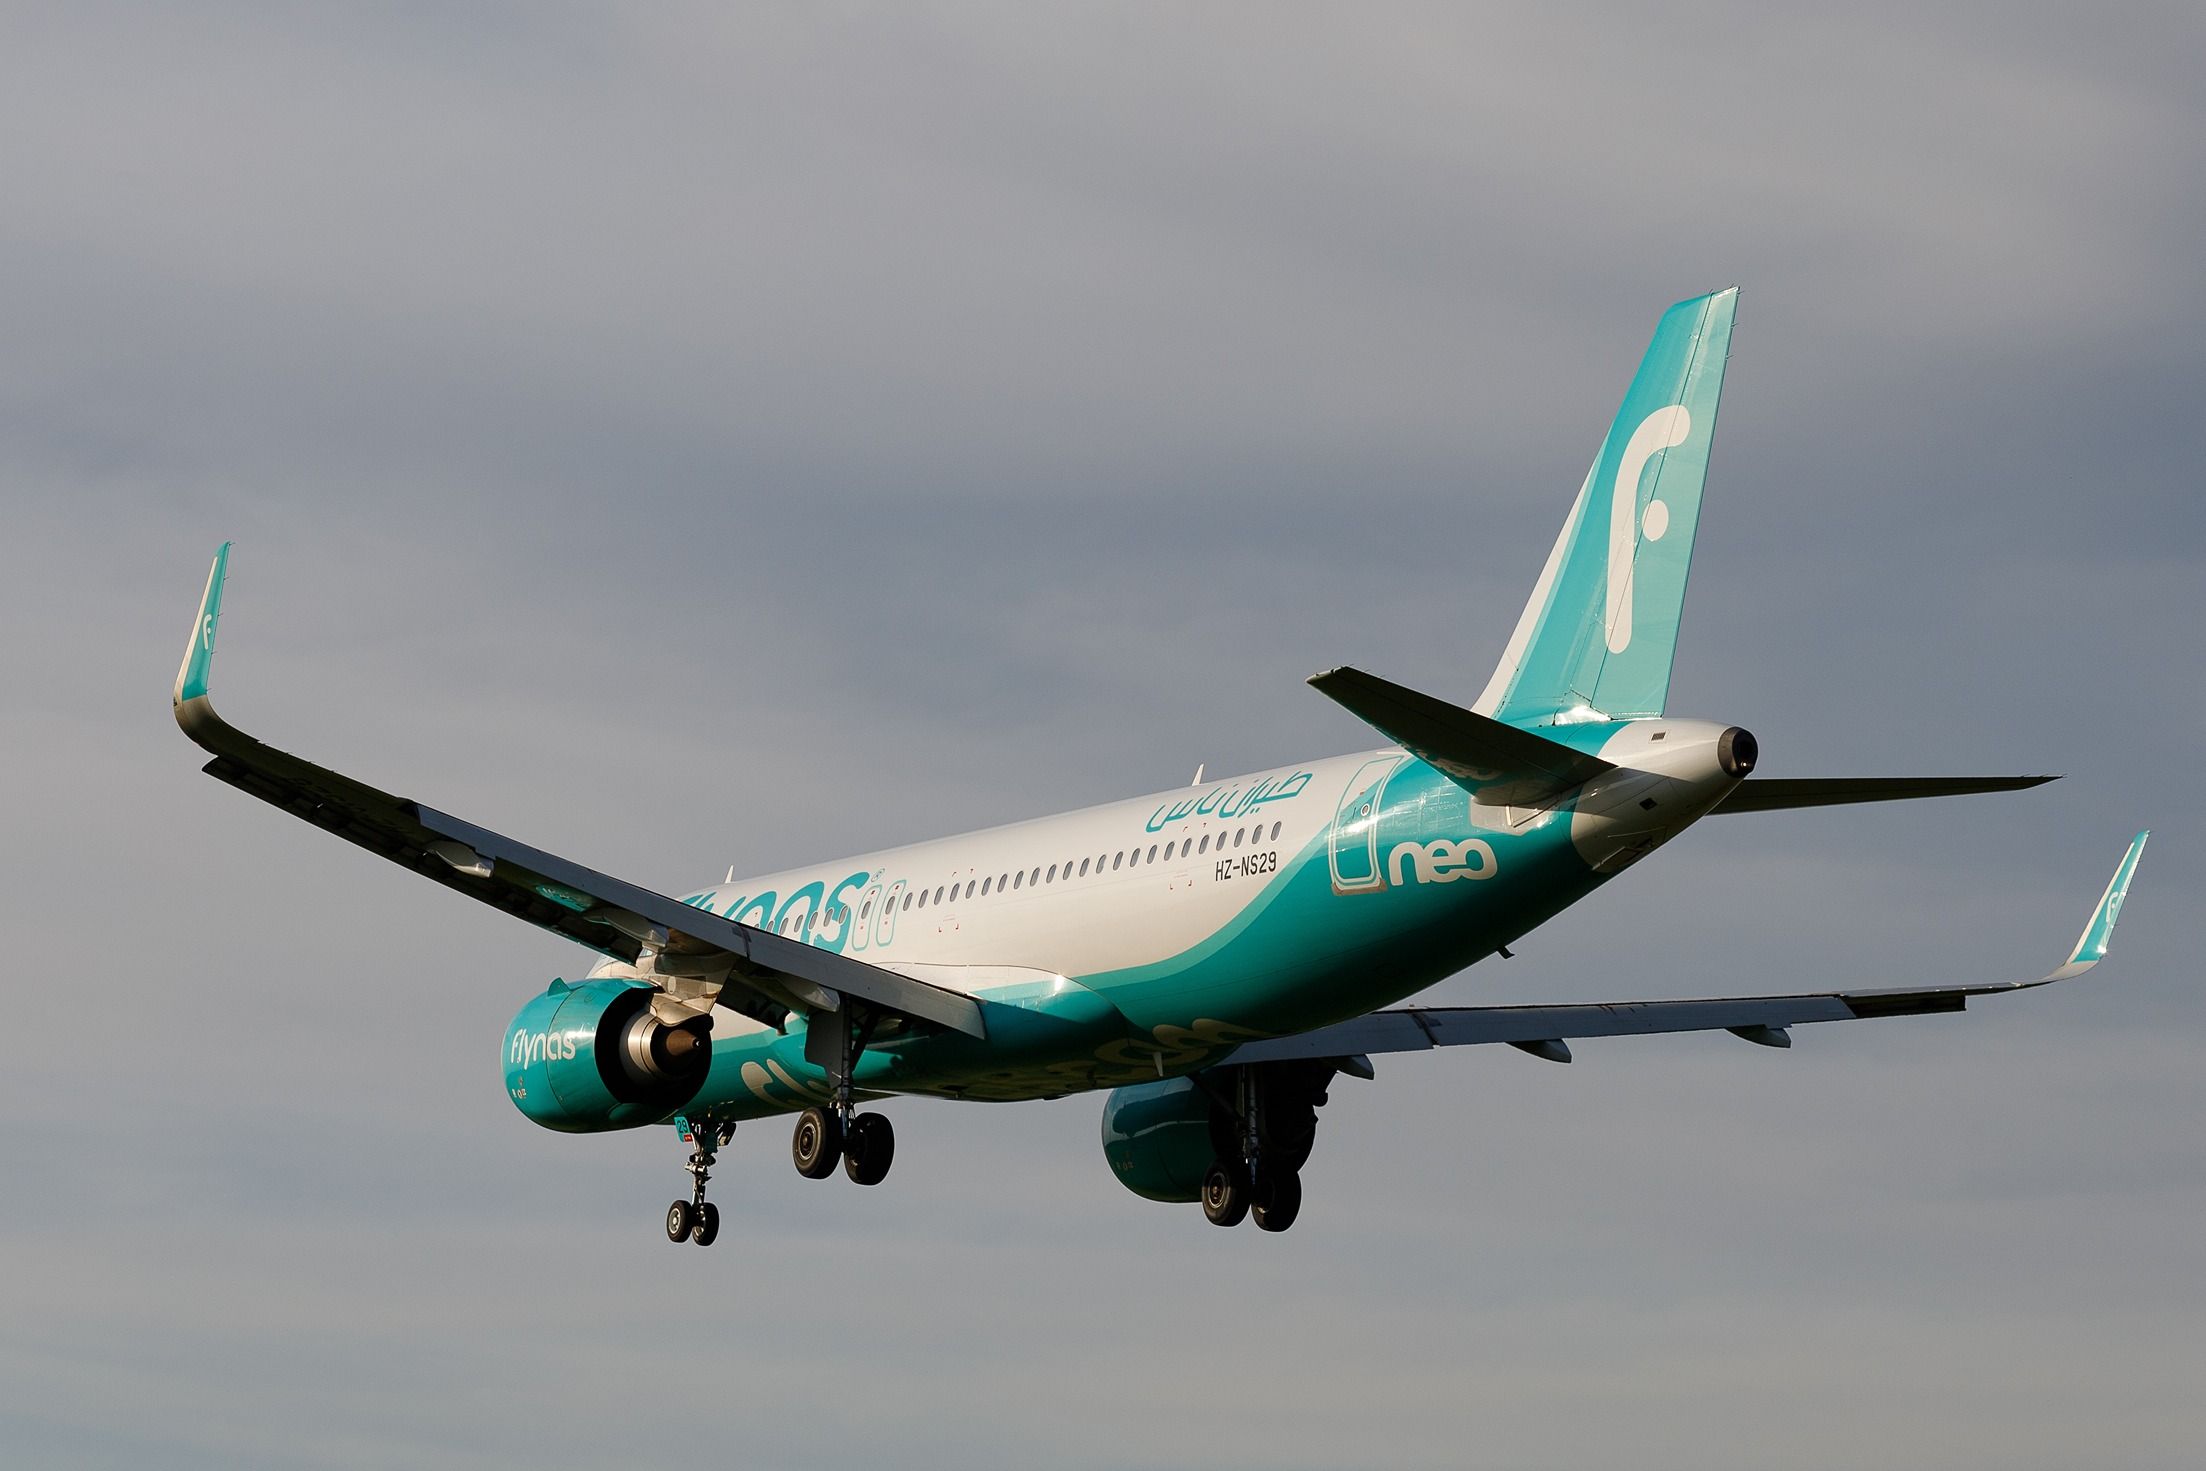 flynas Airbus A320neo landing